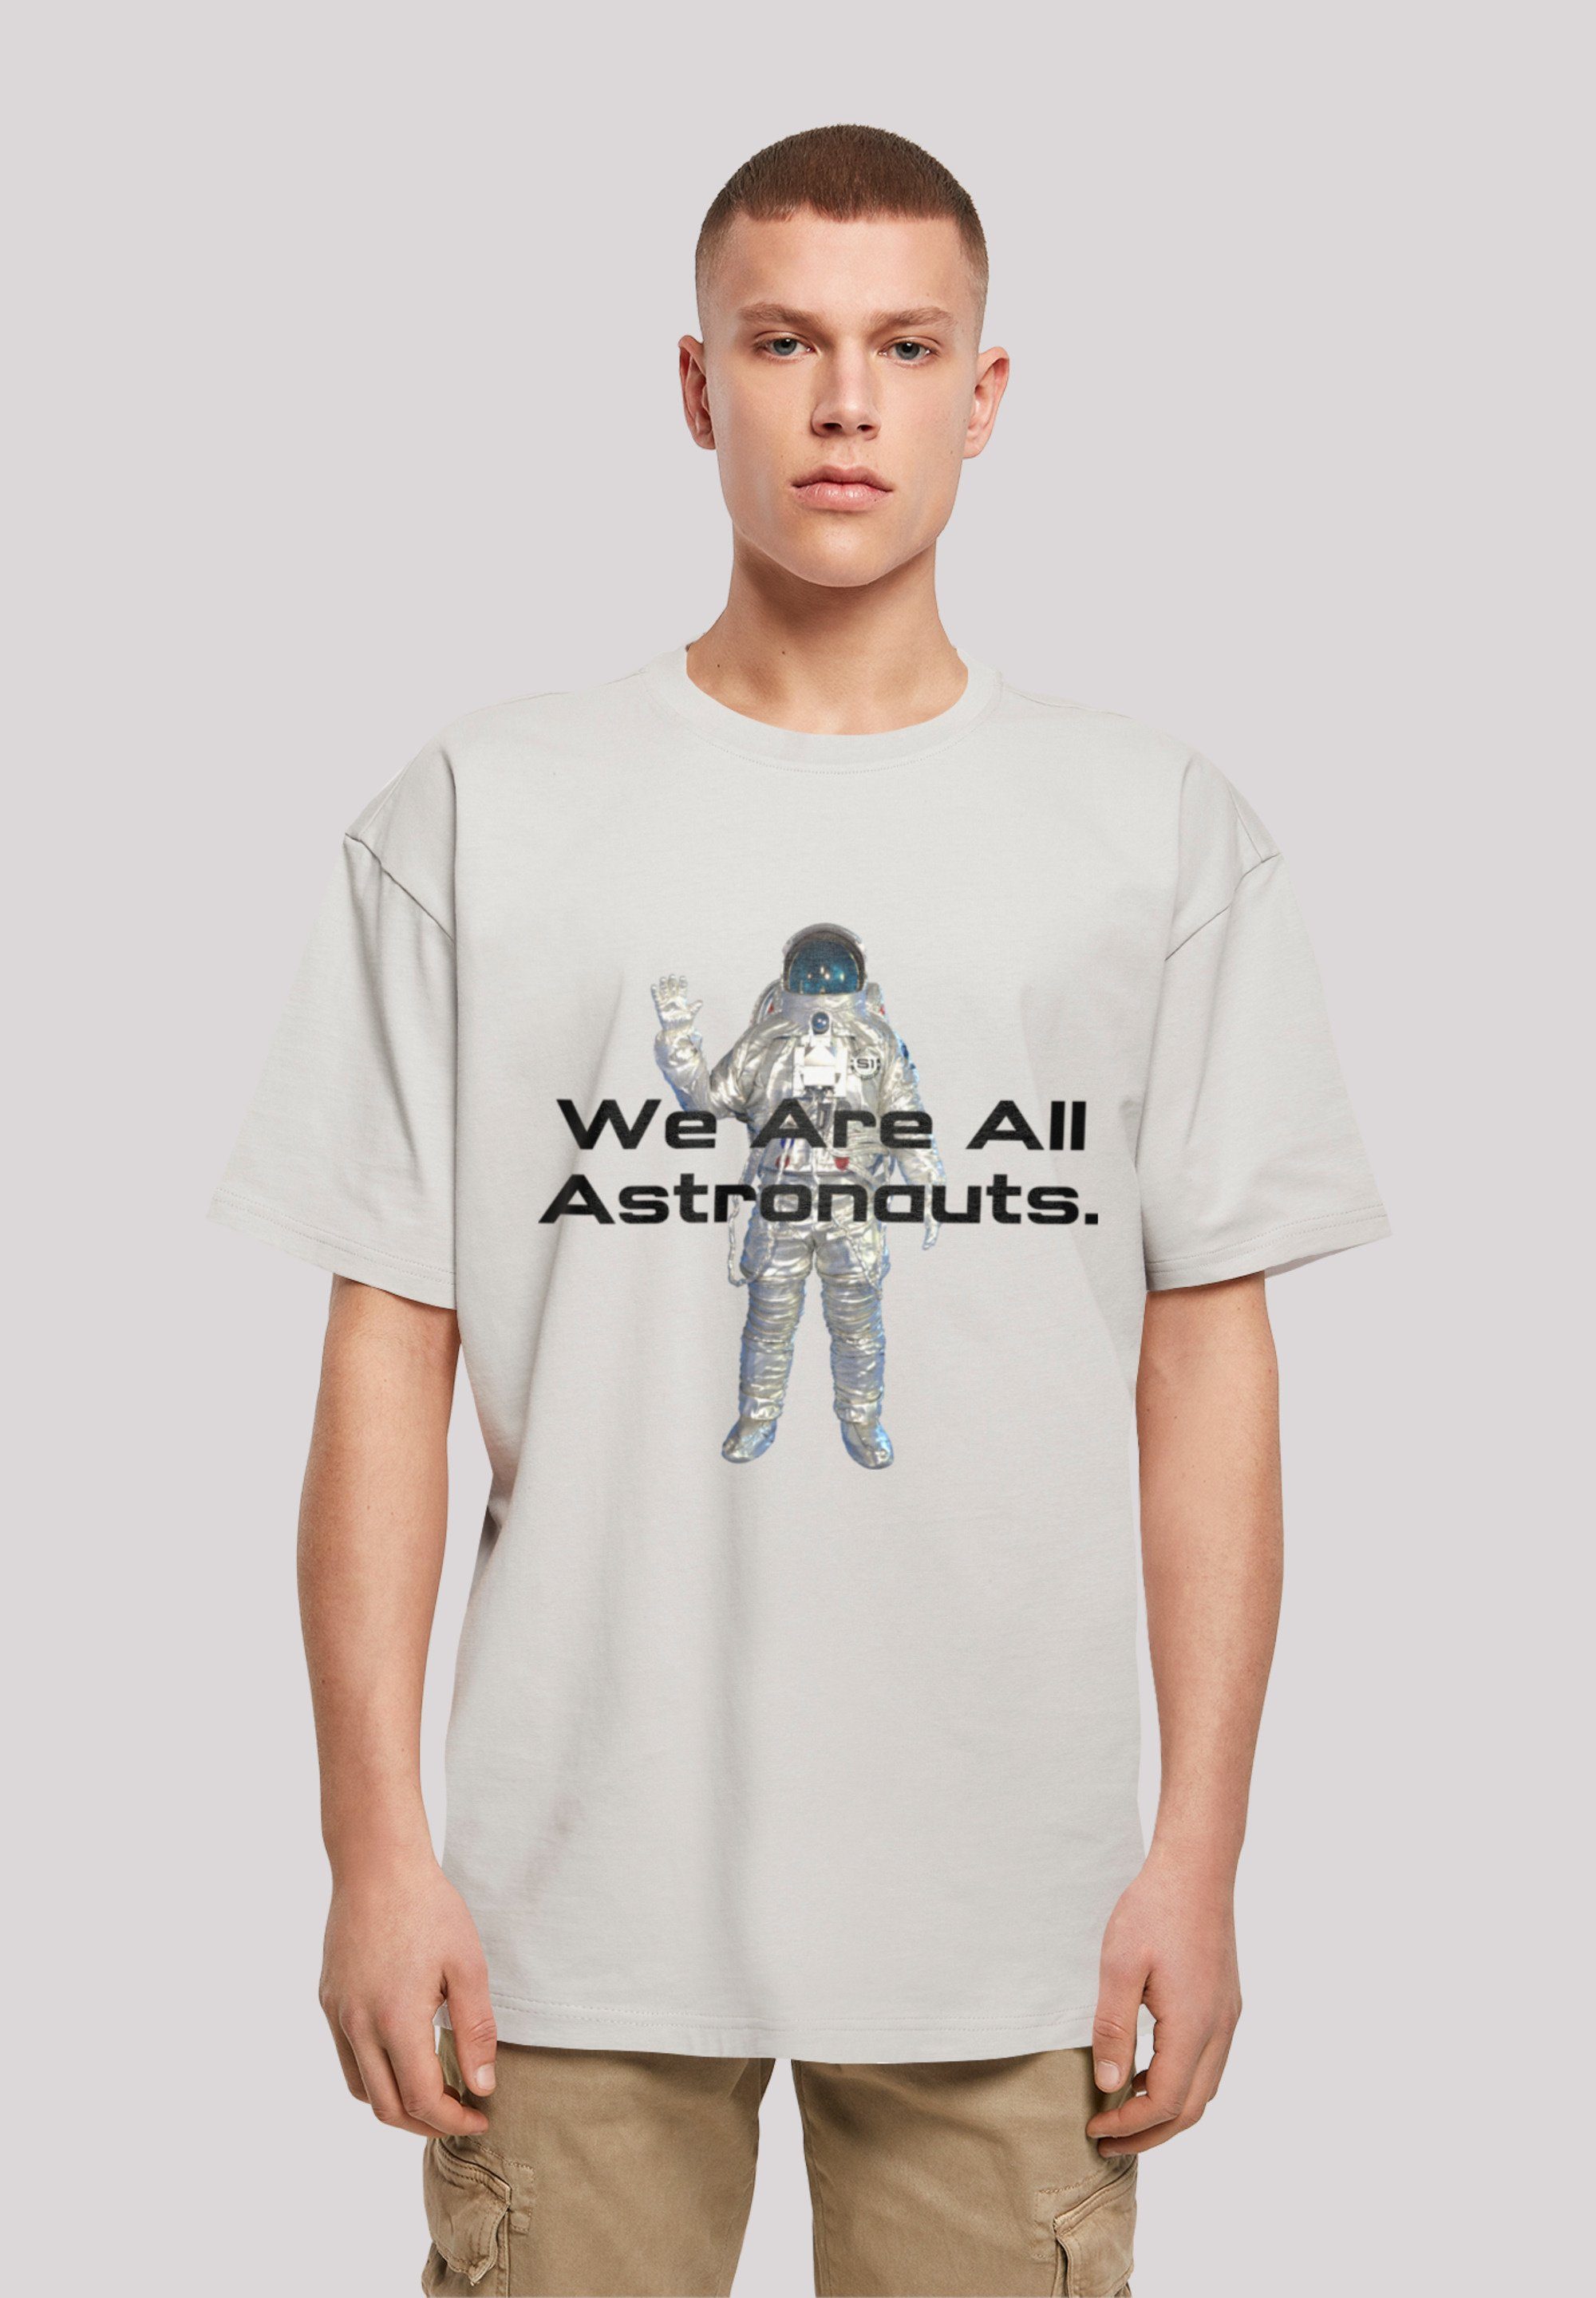 PHIBER SpaceOne T-Shirt all Print F4NT4STIC are astronauts We lightasphalt